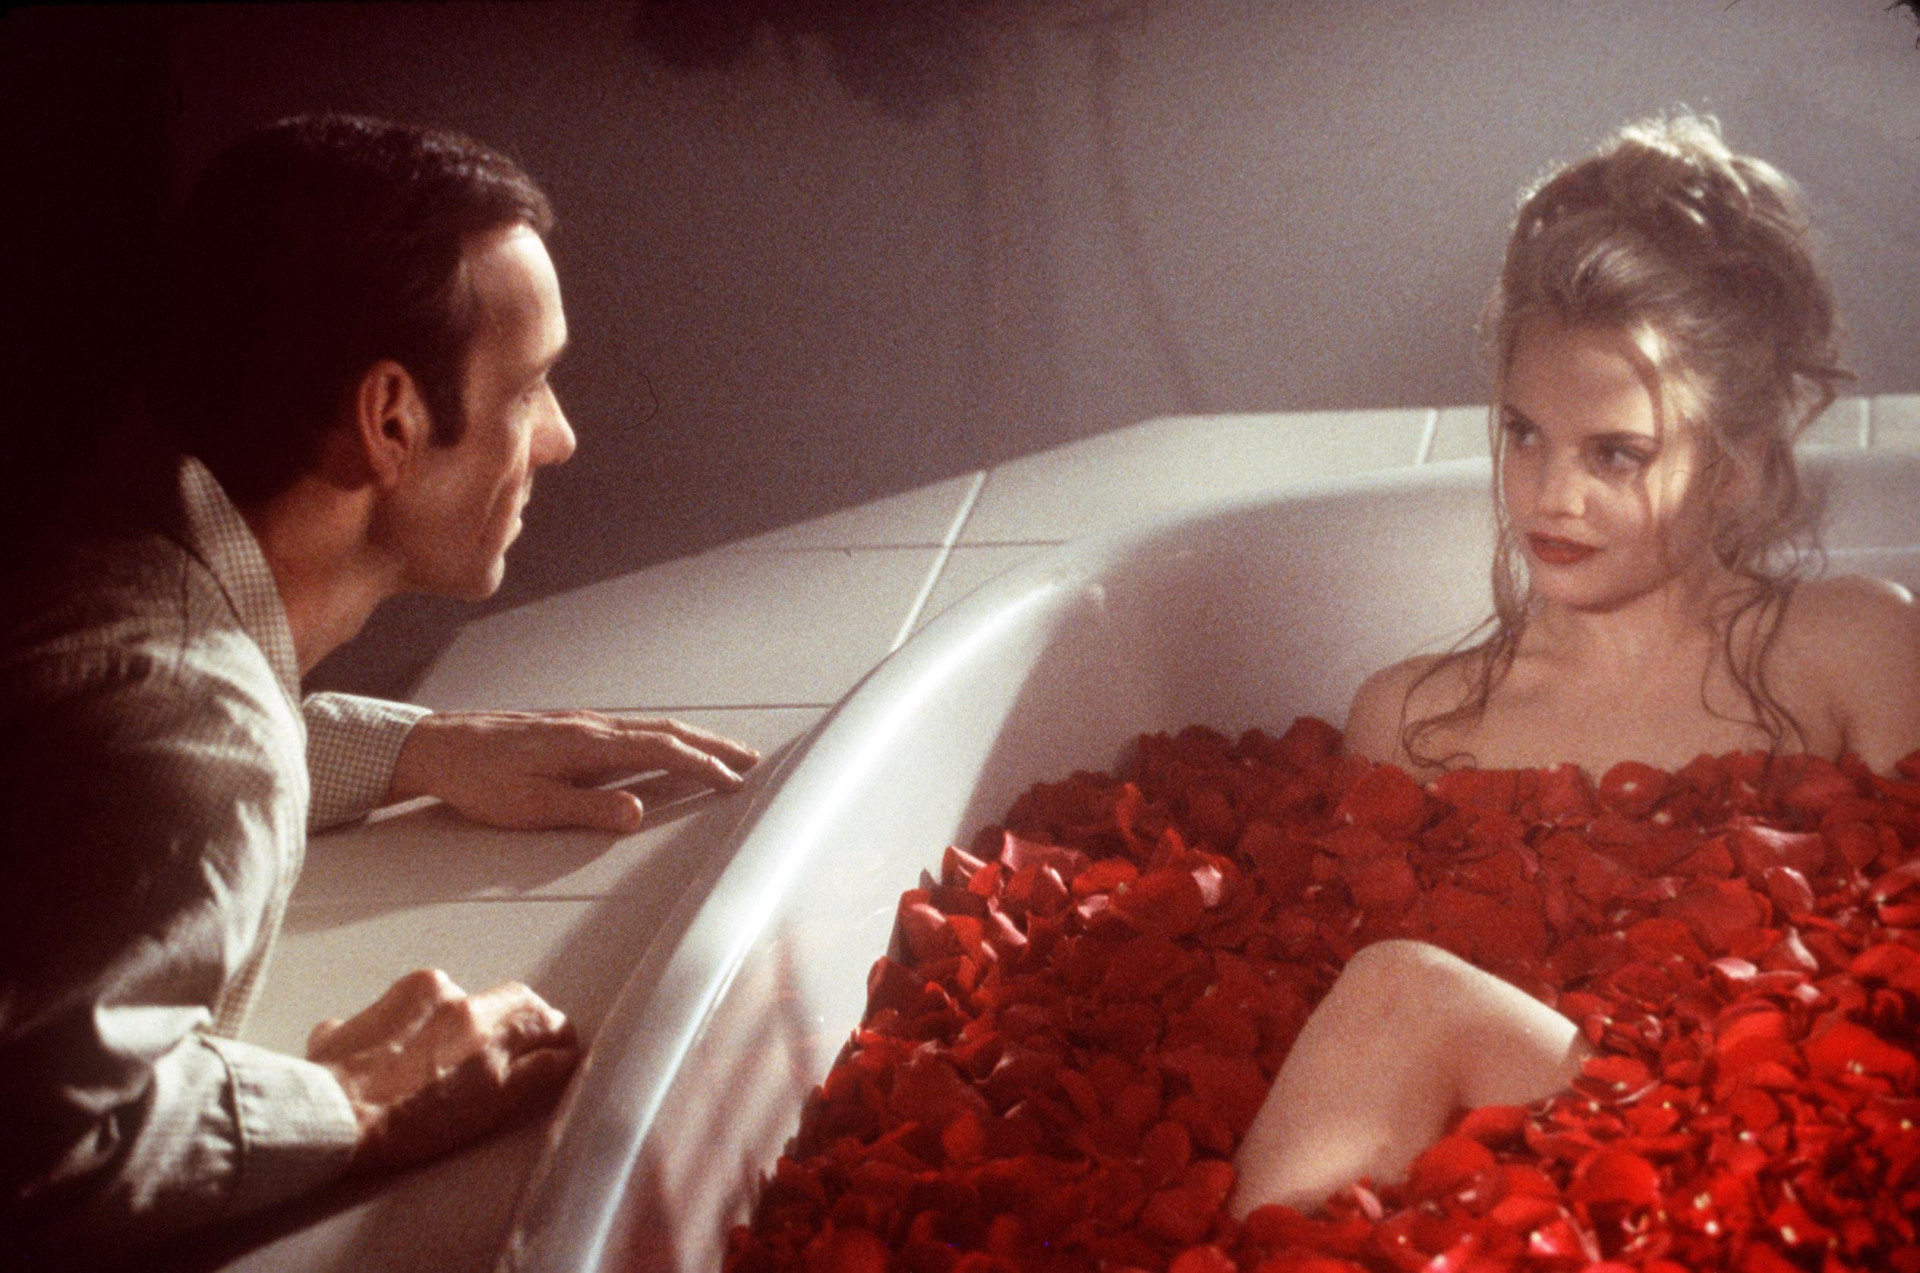 <p>In one of the most seductive bathtub scenes ever filmed, Mena Suvari tempts Kevin Spacey as she bathes in crimson rose petals, a memorable scene from 'American Beauty.'</p><p>You may also like:<a href="https://www.starsinsider.com/n/174742?utm_source=msn.com&utm_medium=display&utm_campaign=referral_description&utm_content=546036en-en"> What is it like to live in space?</a></p>